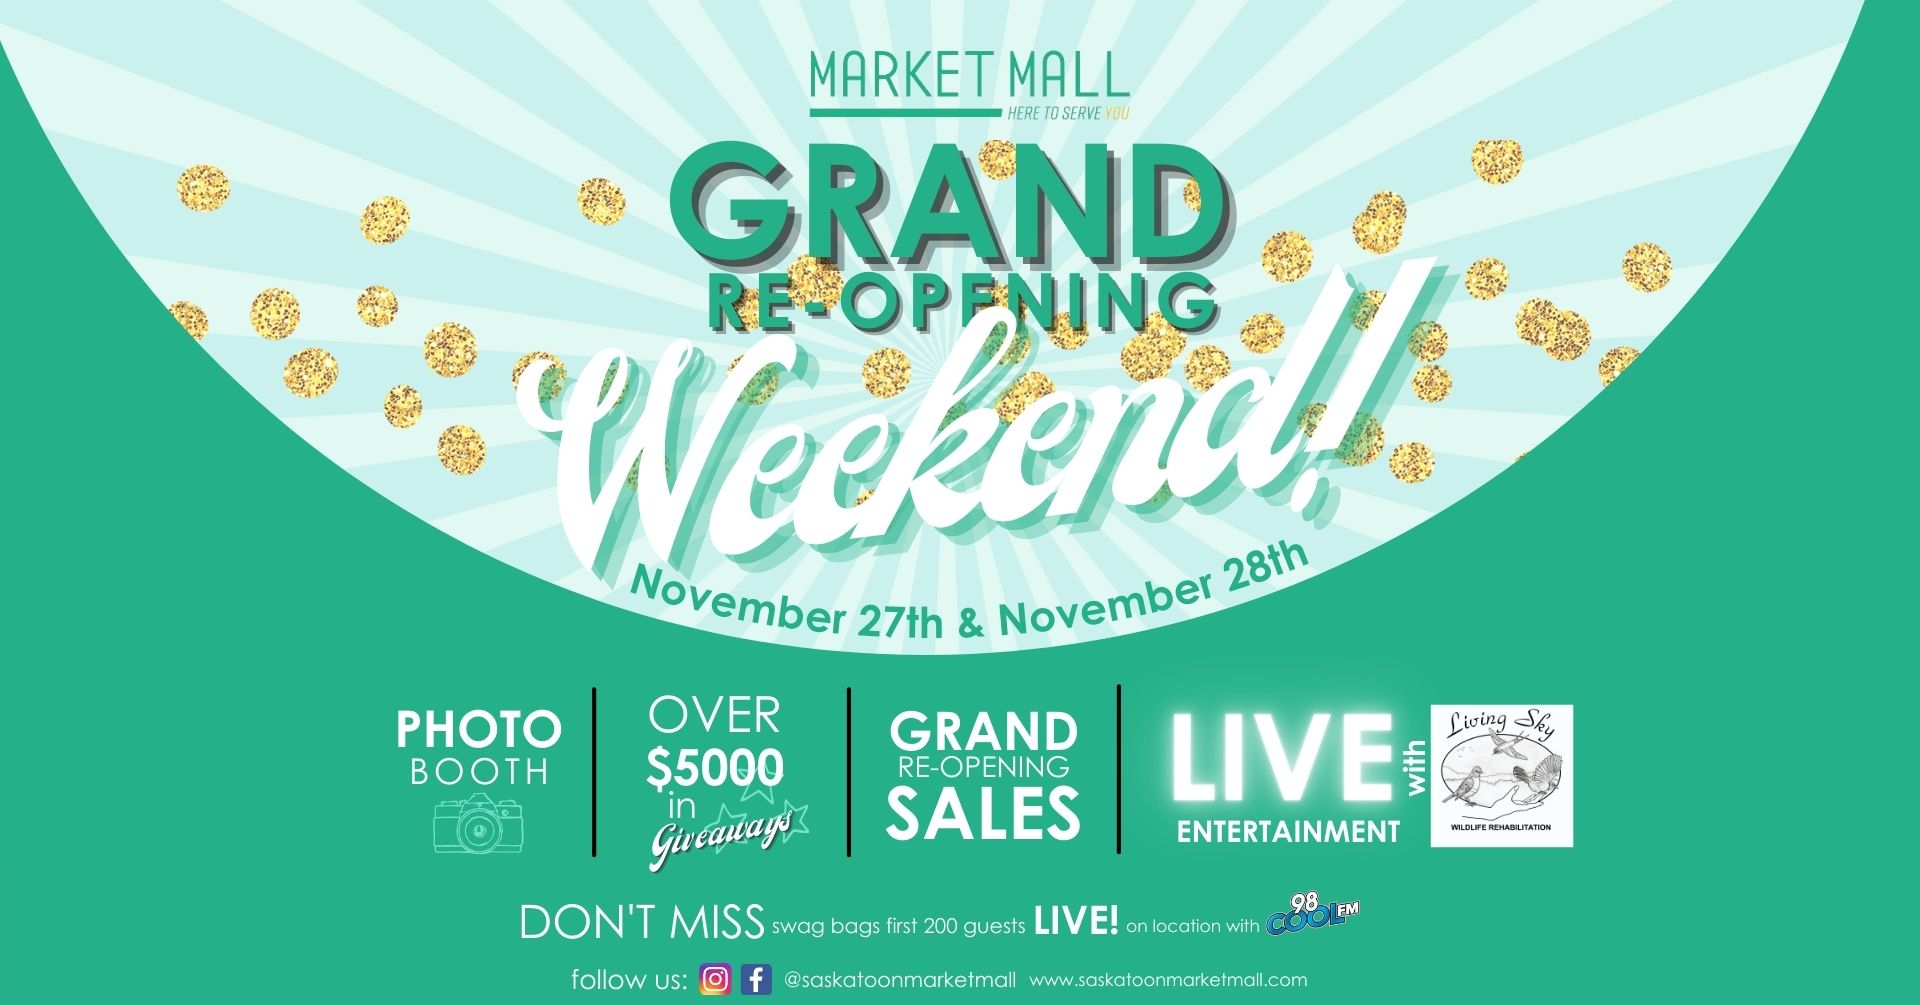 Market Mall Grand Re-Opening